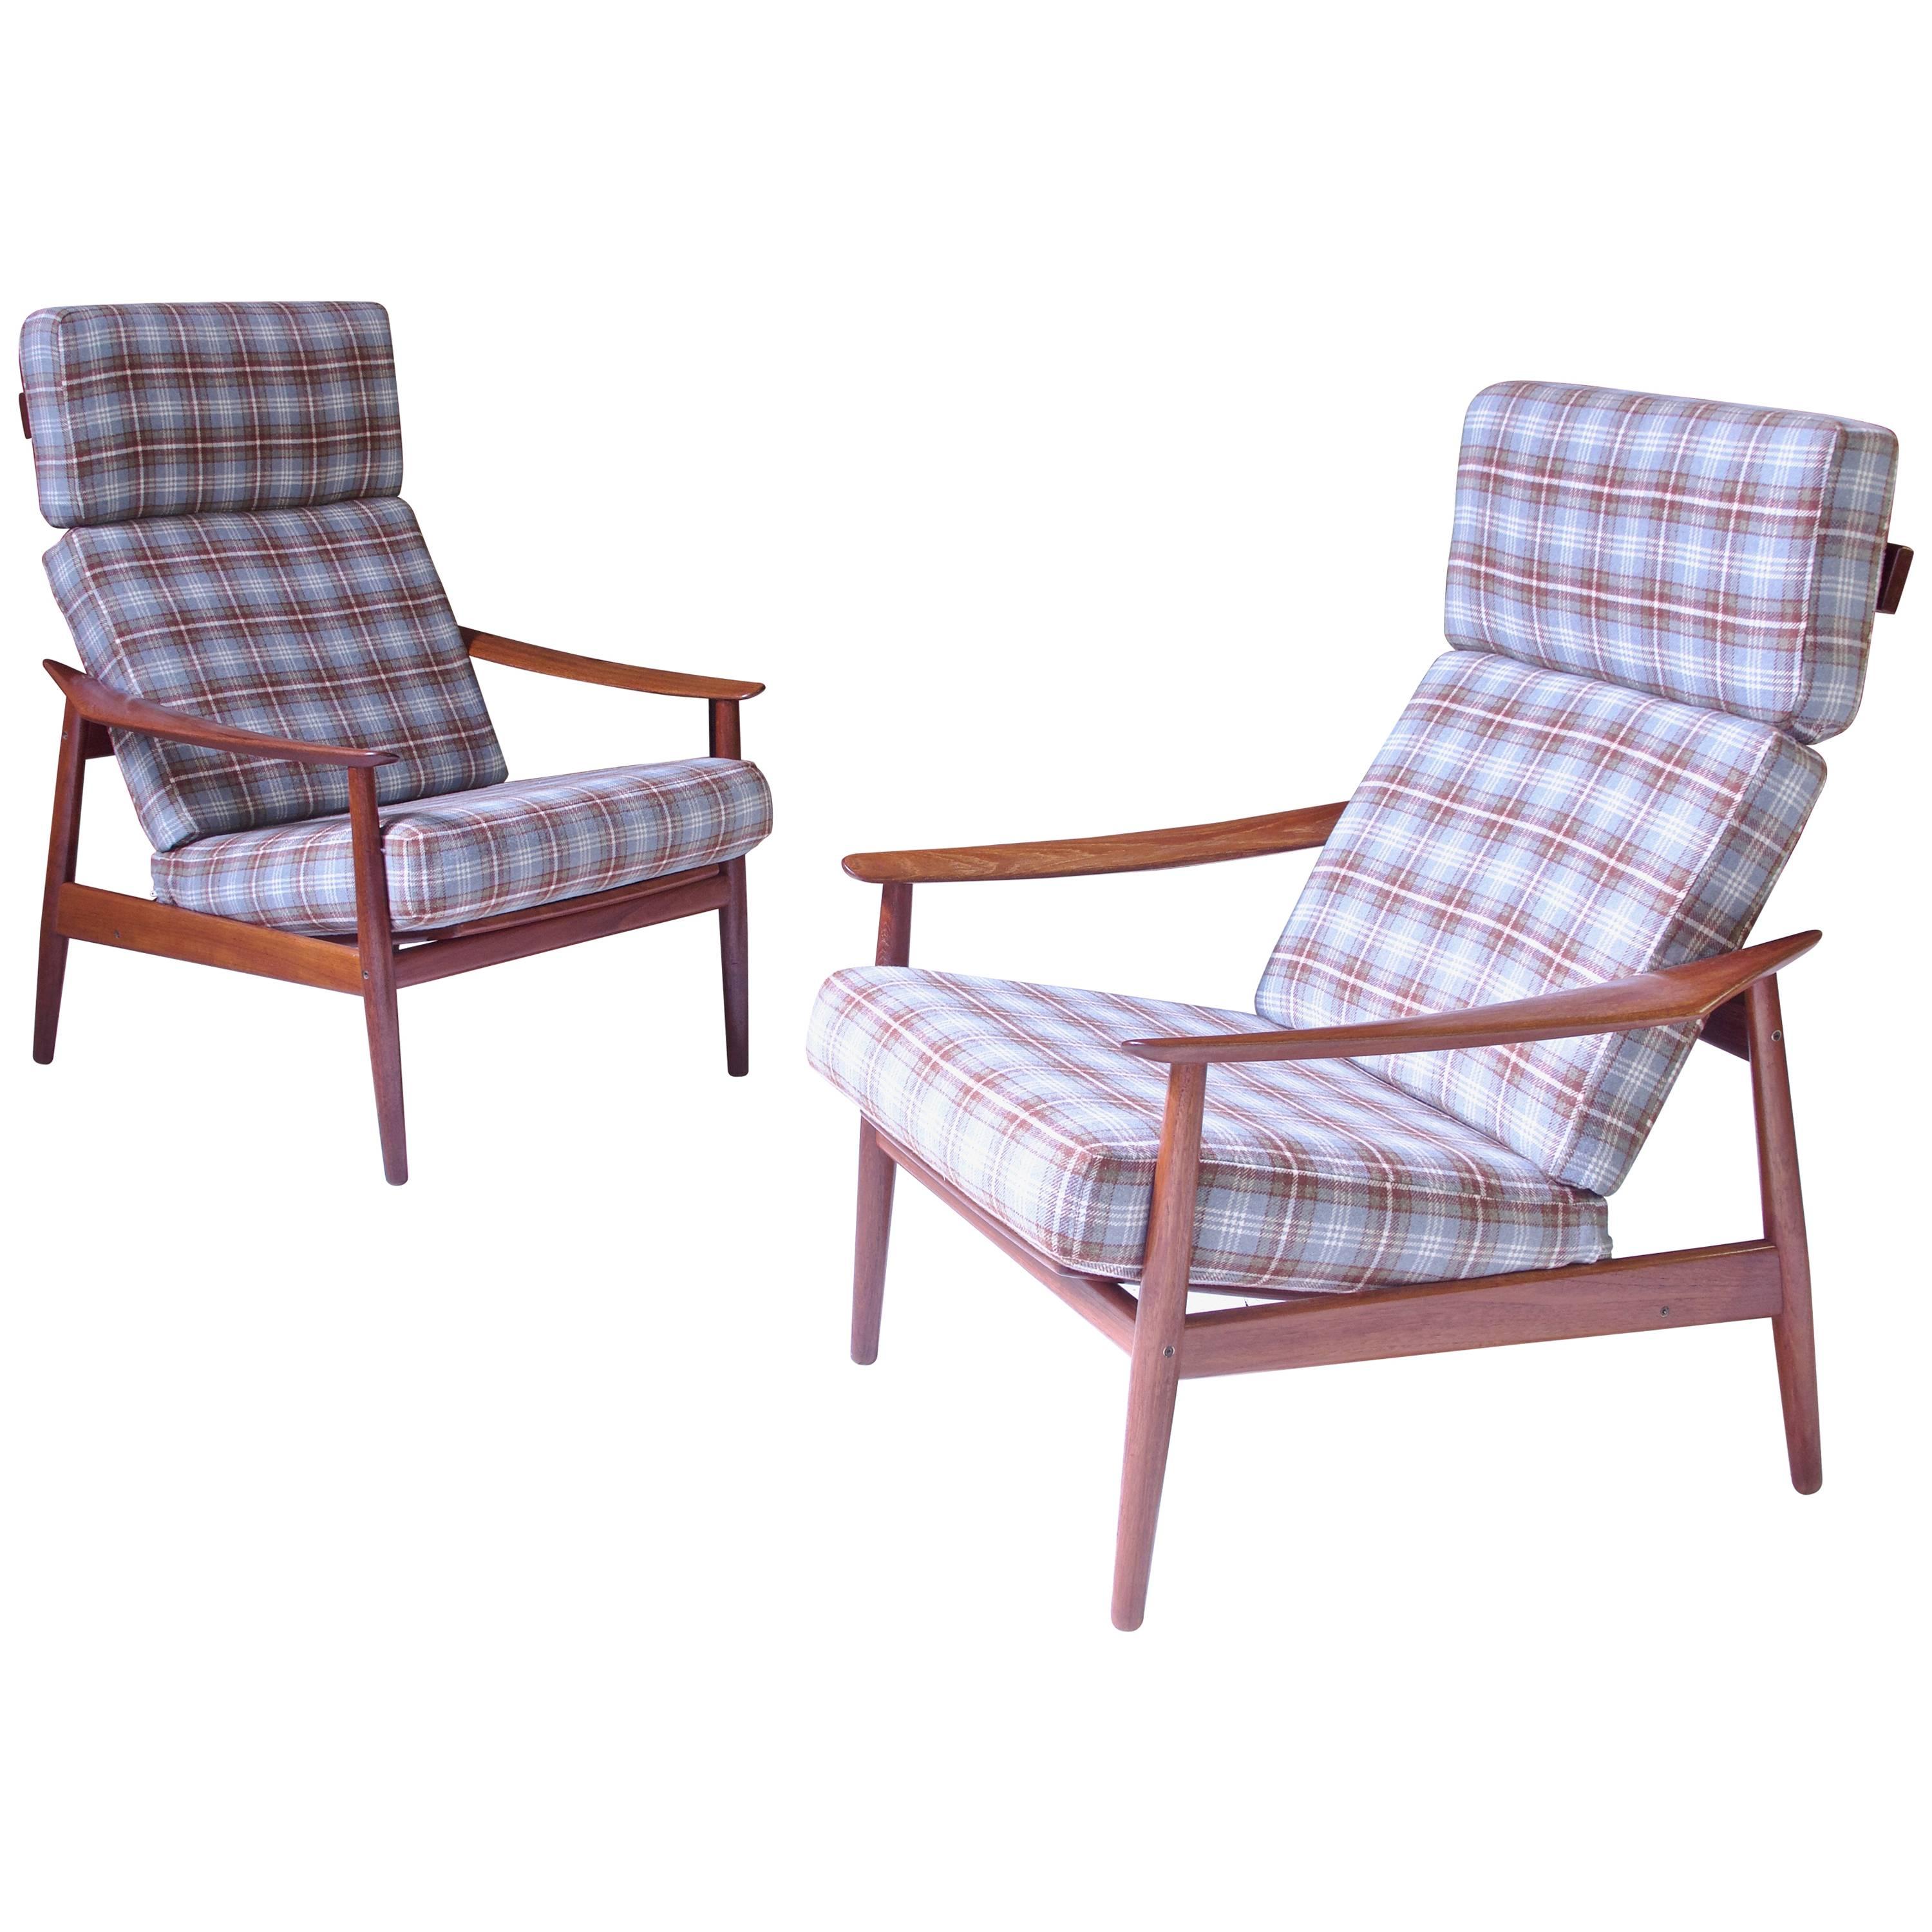 Pair of Arne Vodder FD-164 Reclining Lounge Chairs in Teak and Plaid Wool